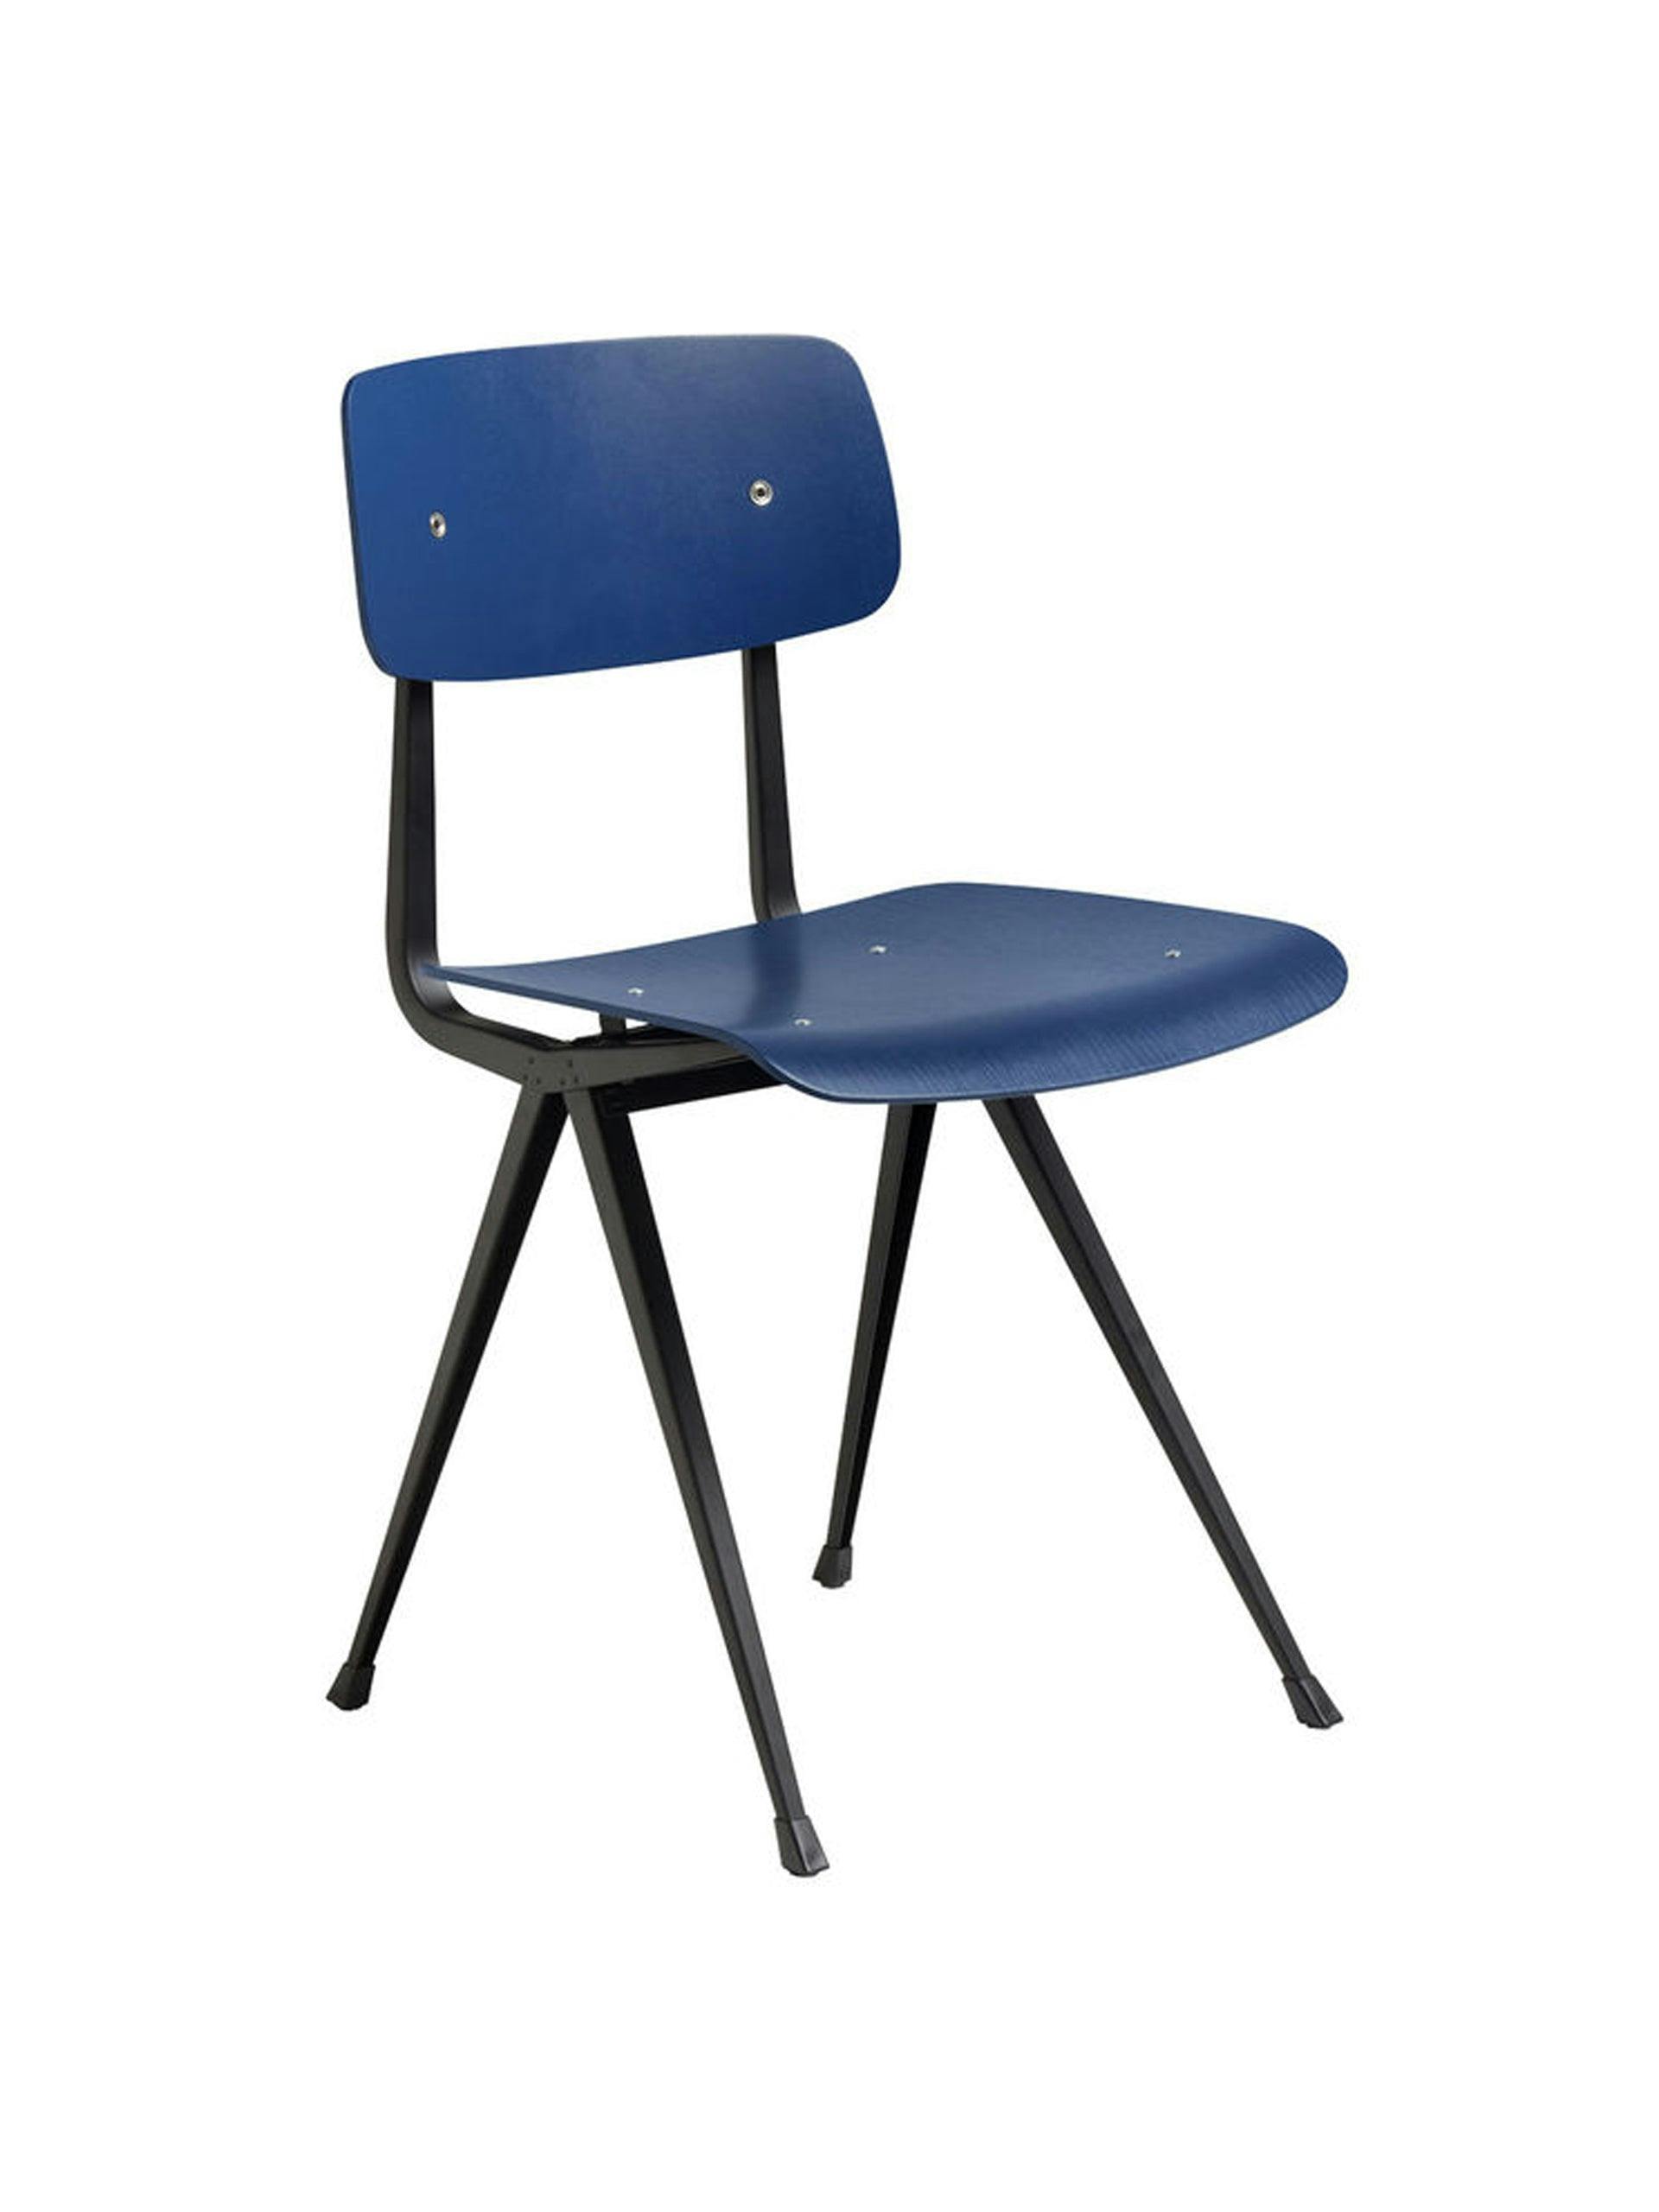 Blue metal and wood chair